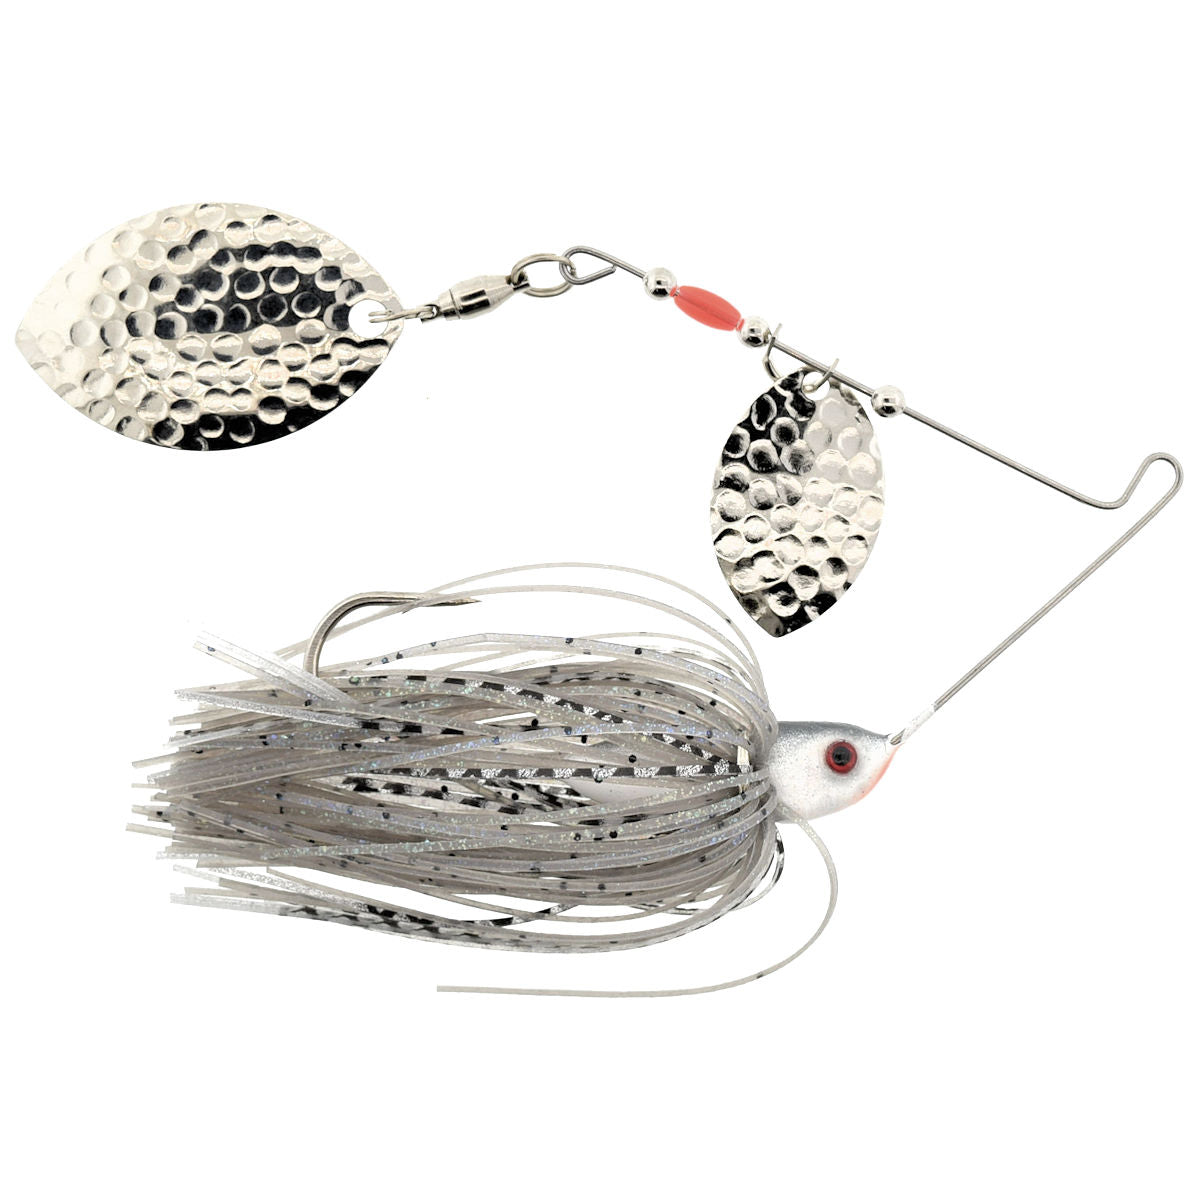 Double Turtle Back Hidden Head Spinnerbait_Natural Shad